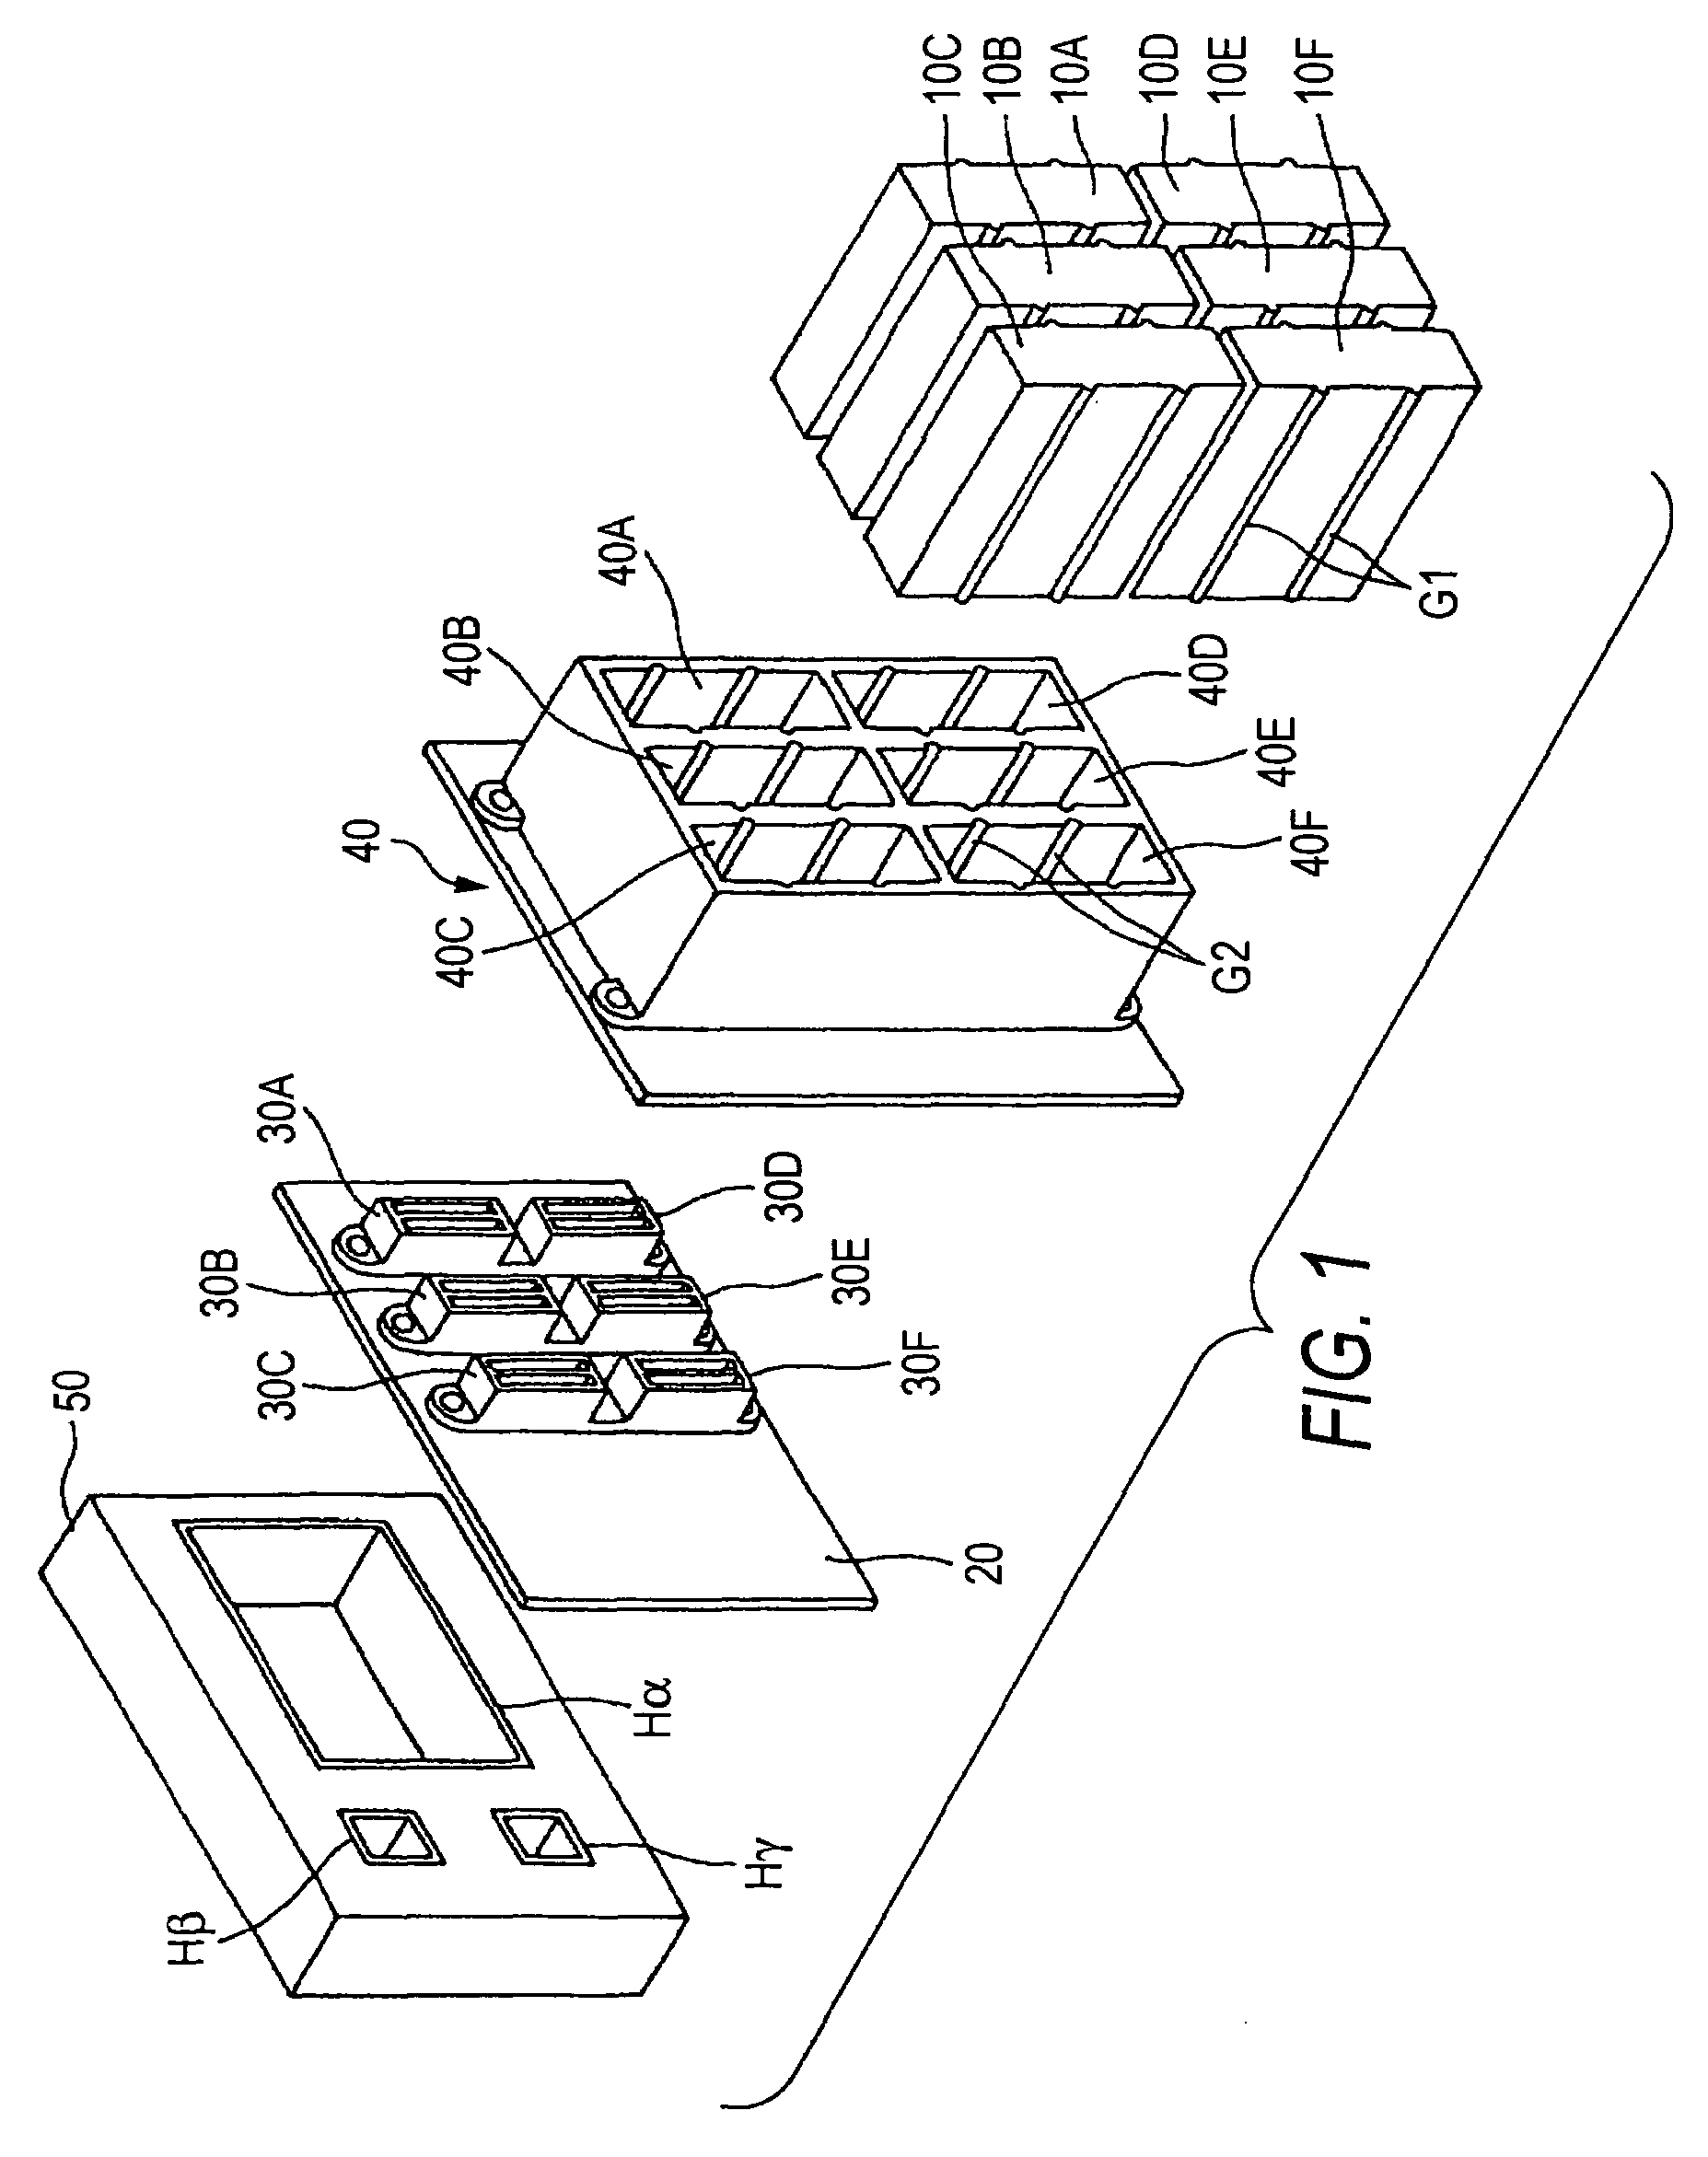 Apparatus equipped with electronic control units